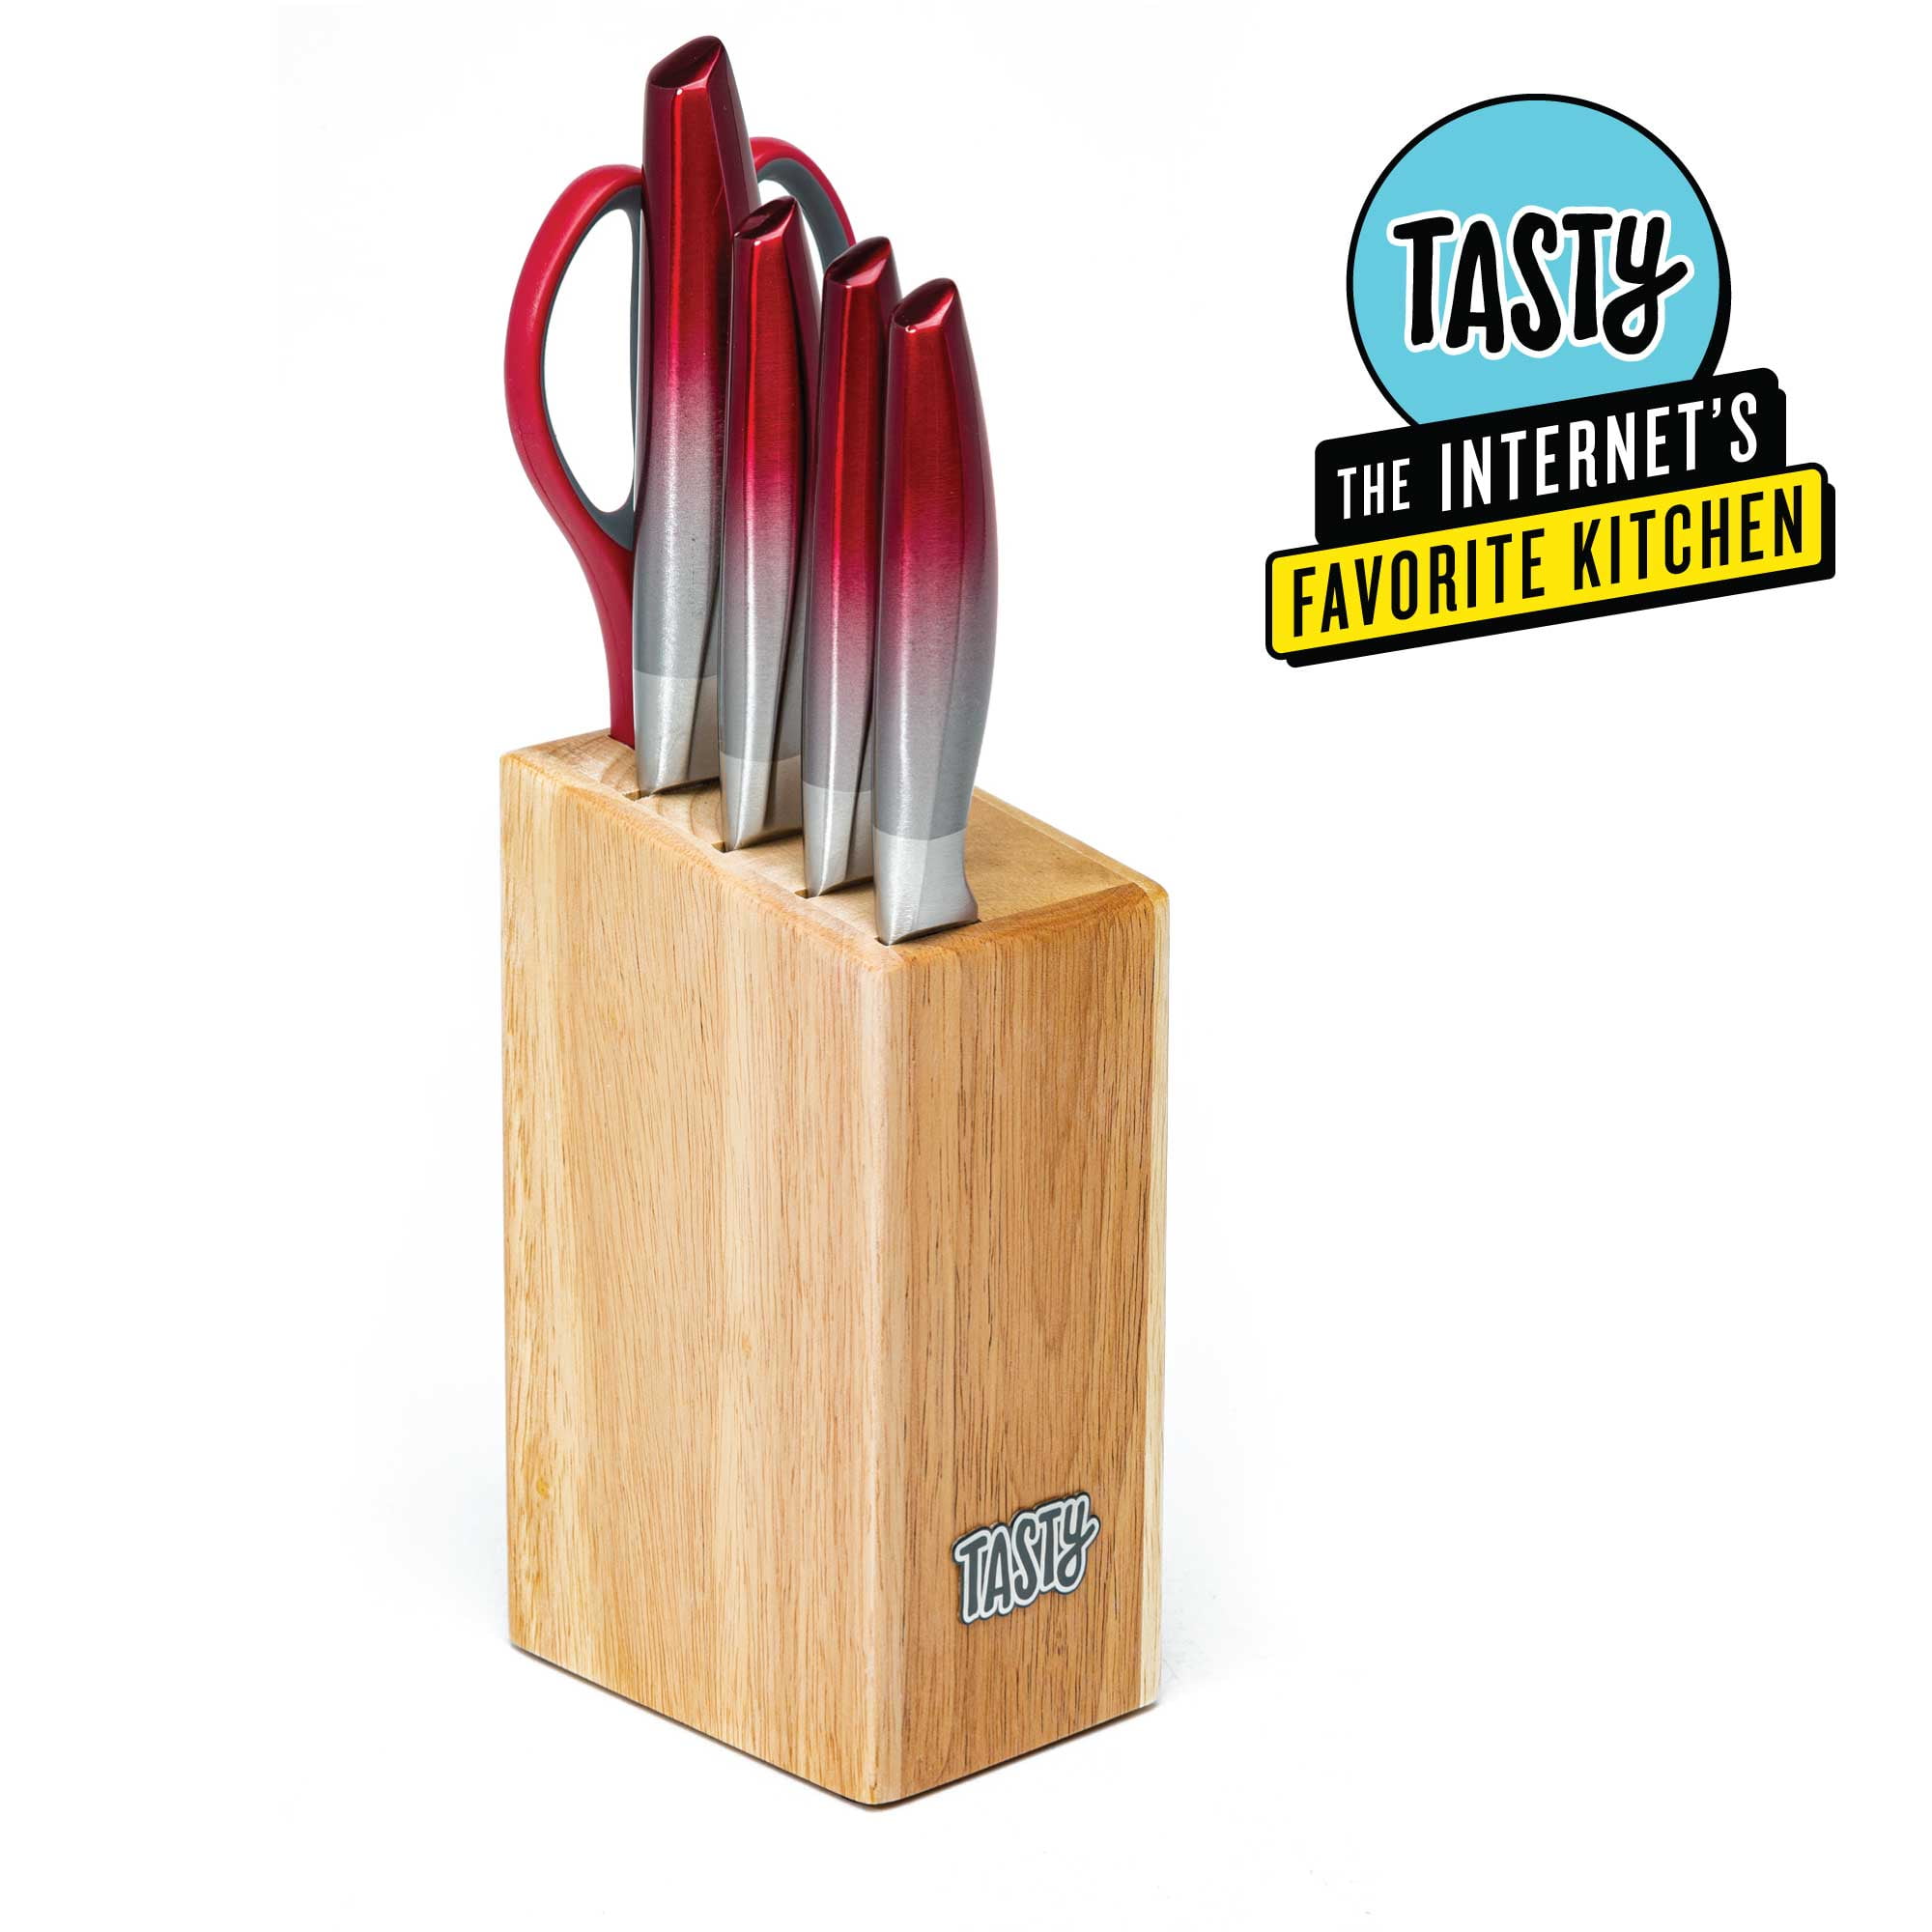 Tasty 6 Piece Prep Knife Block Set, Cutlery Set with Stainless Steel Blades, Red